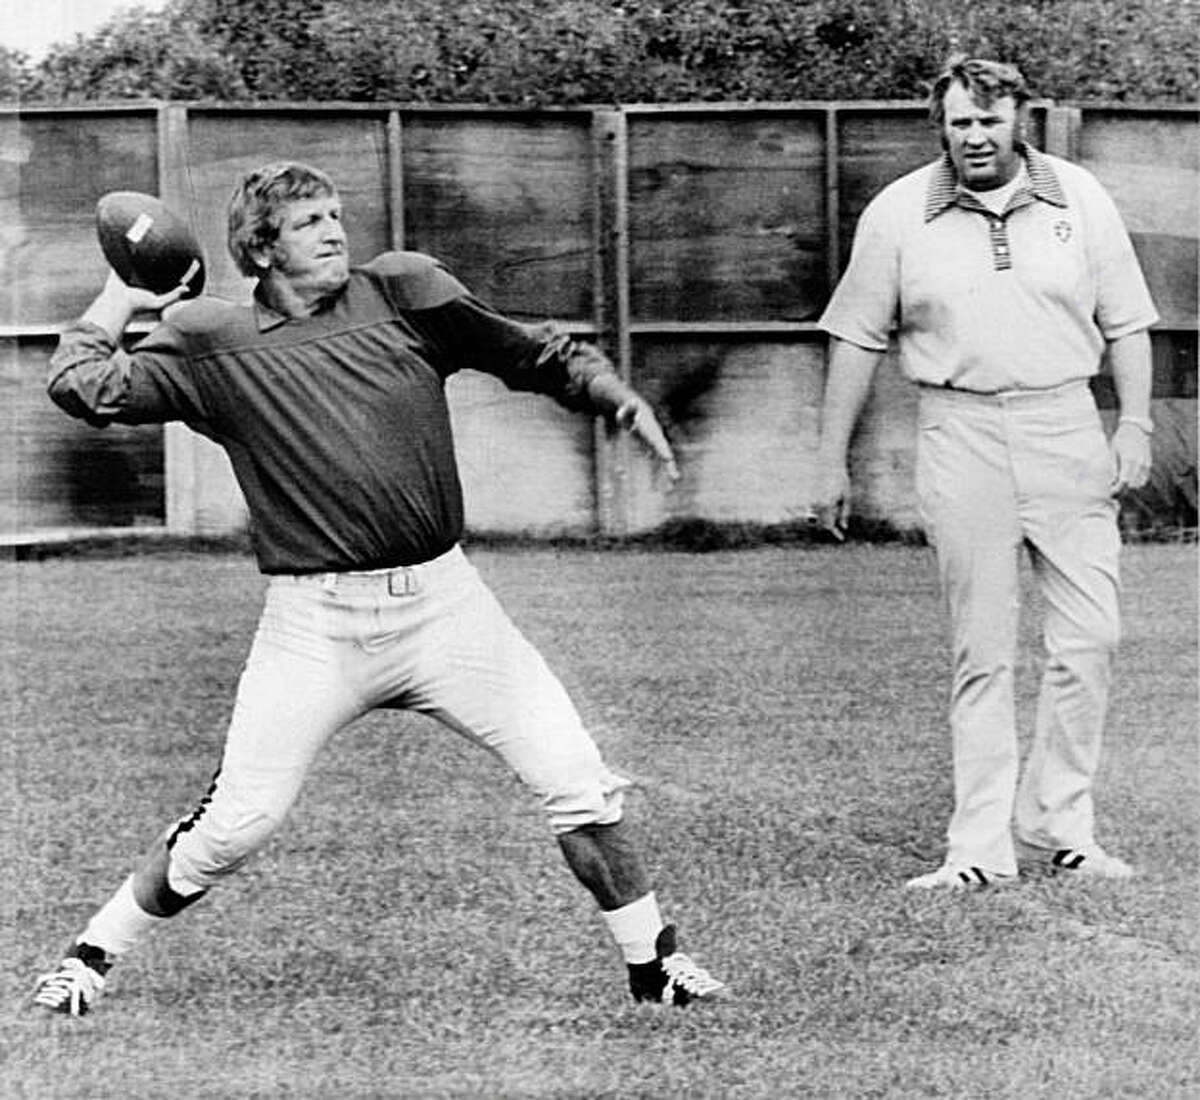 Going strong at age 48. Veteran quarterback and kicker George Blanda of the Oakland Raiders gets set to toss the ball during practice on Wednesday in Oakland, under the watchful eye of head coach John Madden. Wednesday was Blanda's 48th birthday. He's entGoing strong at age 48. Veteran quarterback and kicker George Blanda of the Oakland Raiders gets set to toss the ball during practice on Wednesday in Oakland, under the watchful eye of head coach John Madden. Wednesday was Blanda's 48th birthday. He's entering his 26th pro season and is just 81 points shy of becoming the first 2,000 point scorer in pro football history. Photo was taken September 18, 1975.